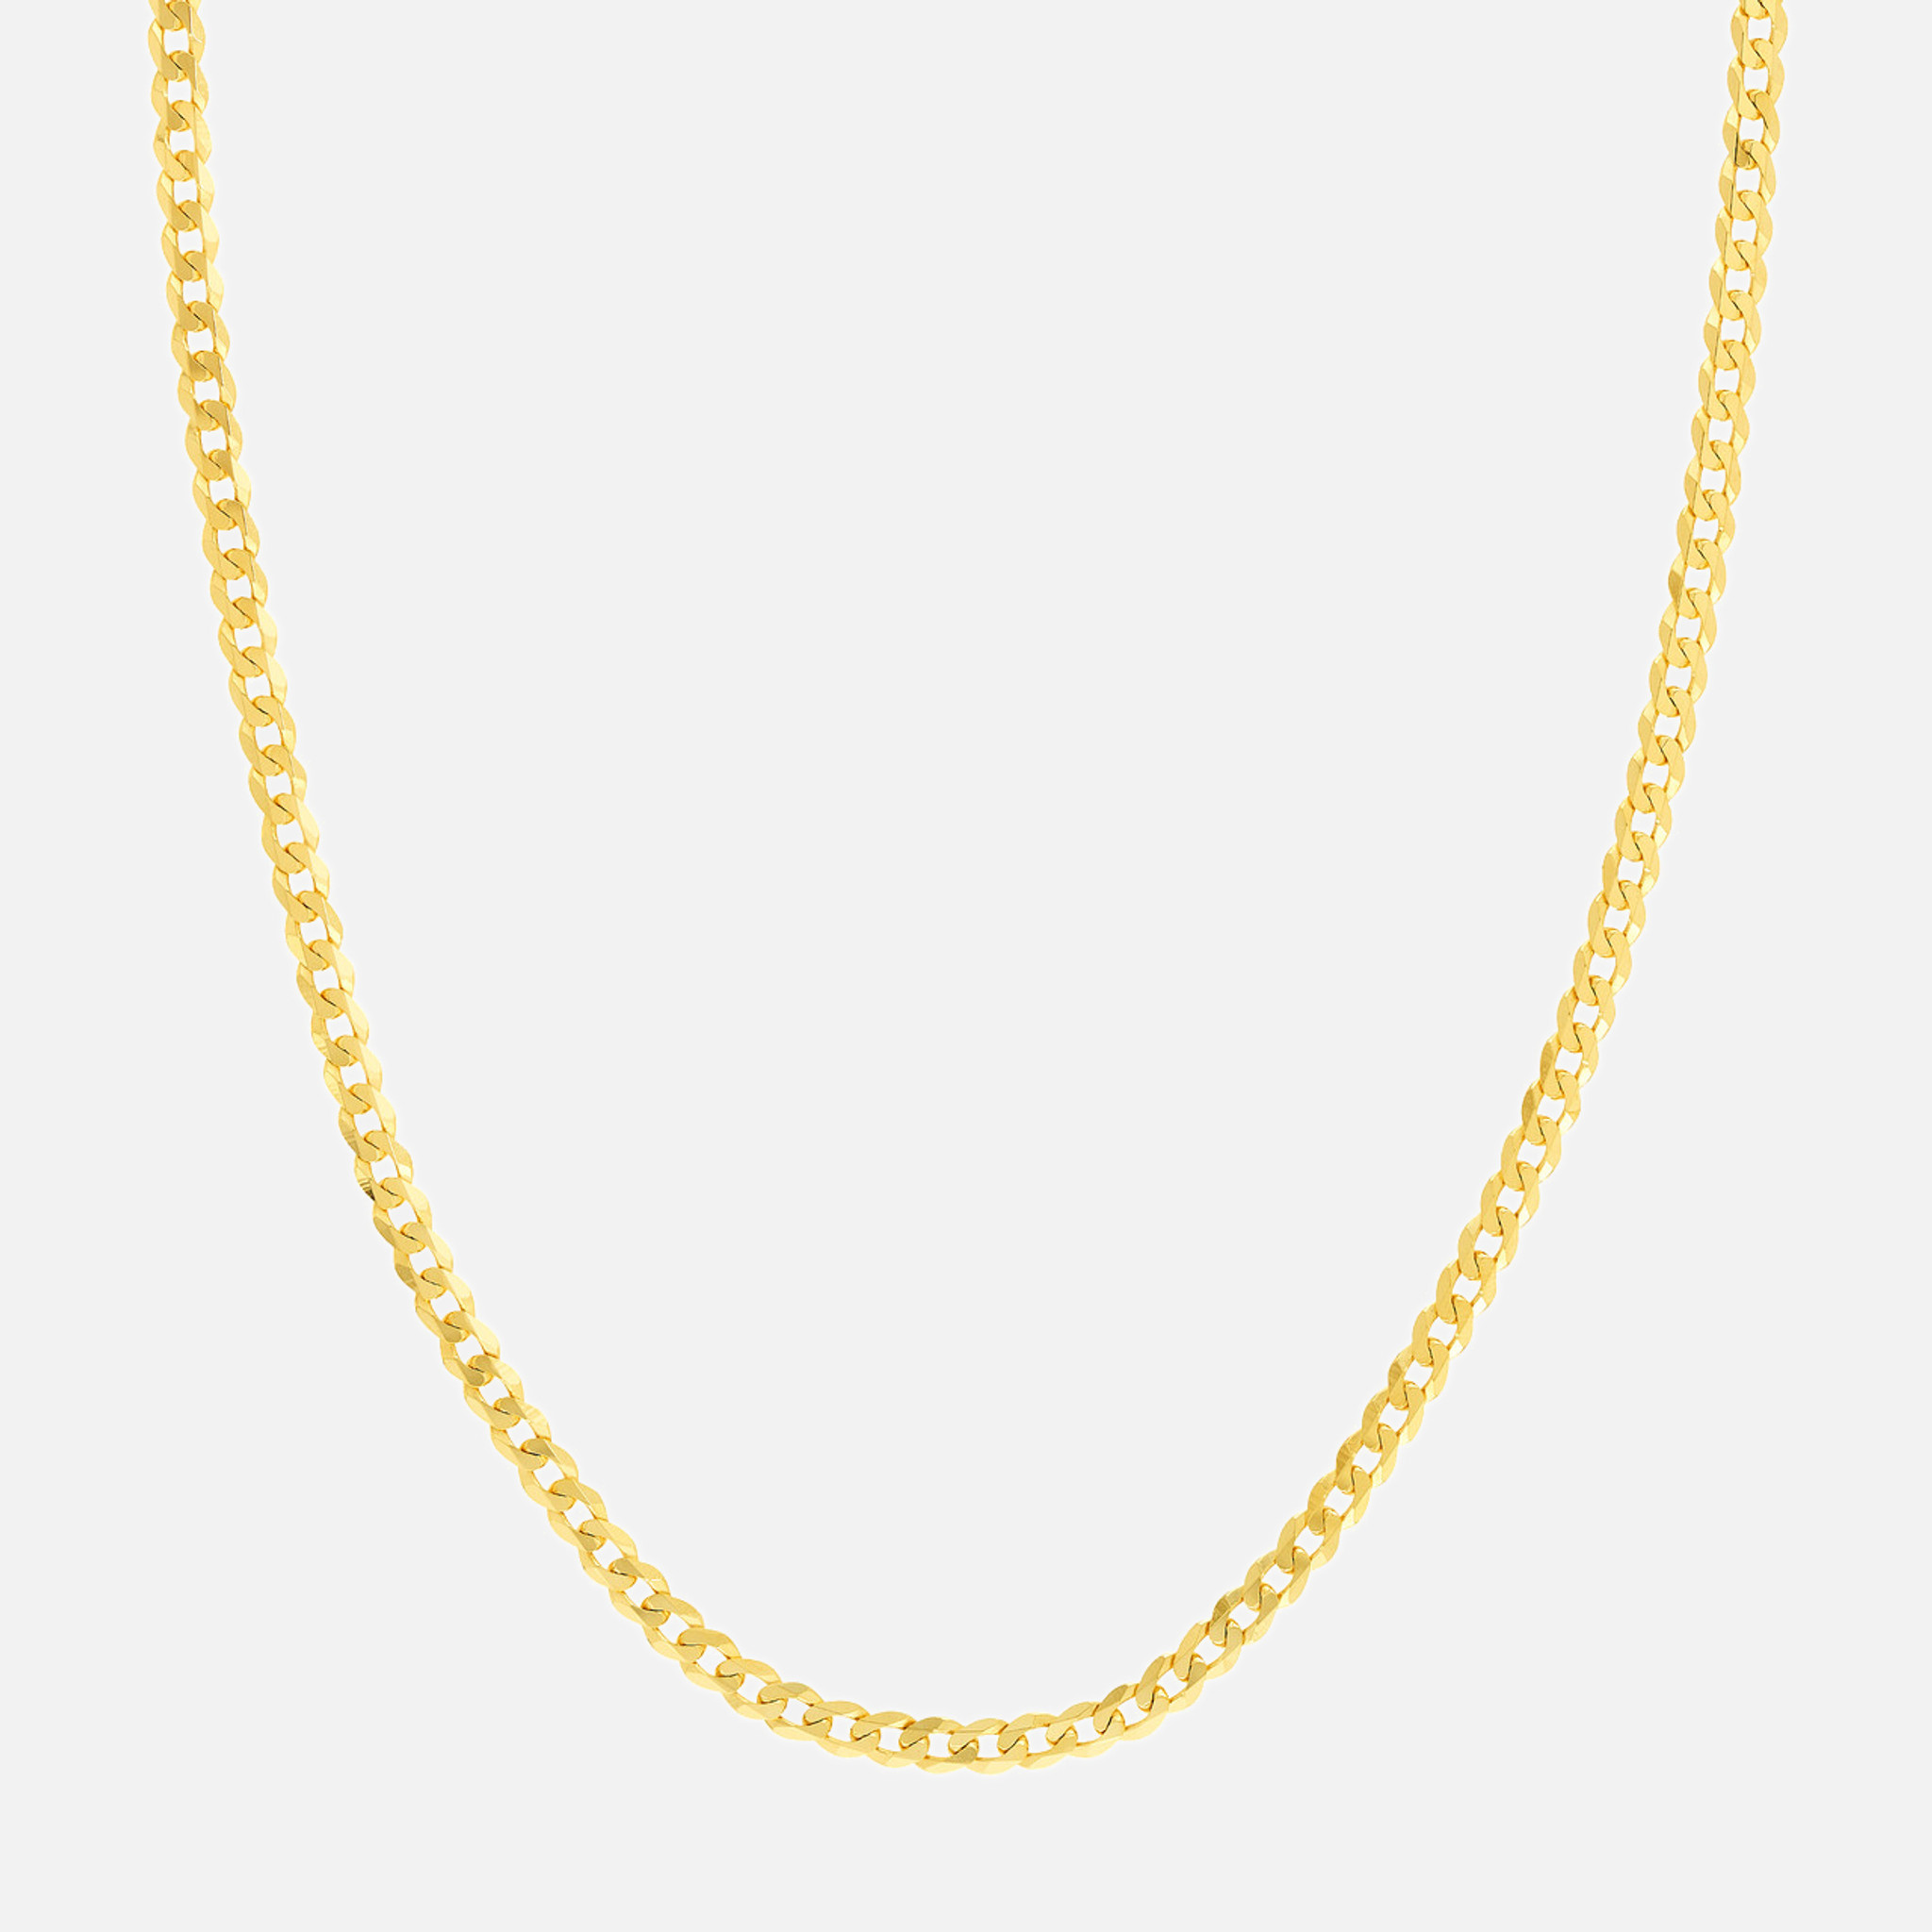 Elegant display of the gold curb chain anklet, crafted with timeless beauty in buttery 10k & 14k gold, featuring shiny 2.6mm chain links and a comfortable lobster clasp fastening.